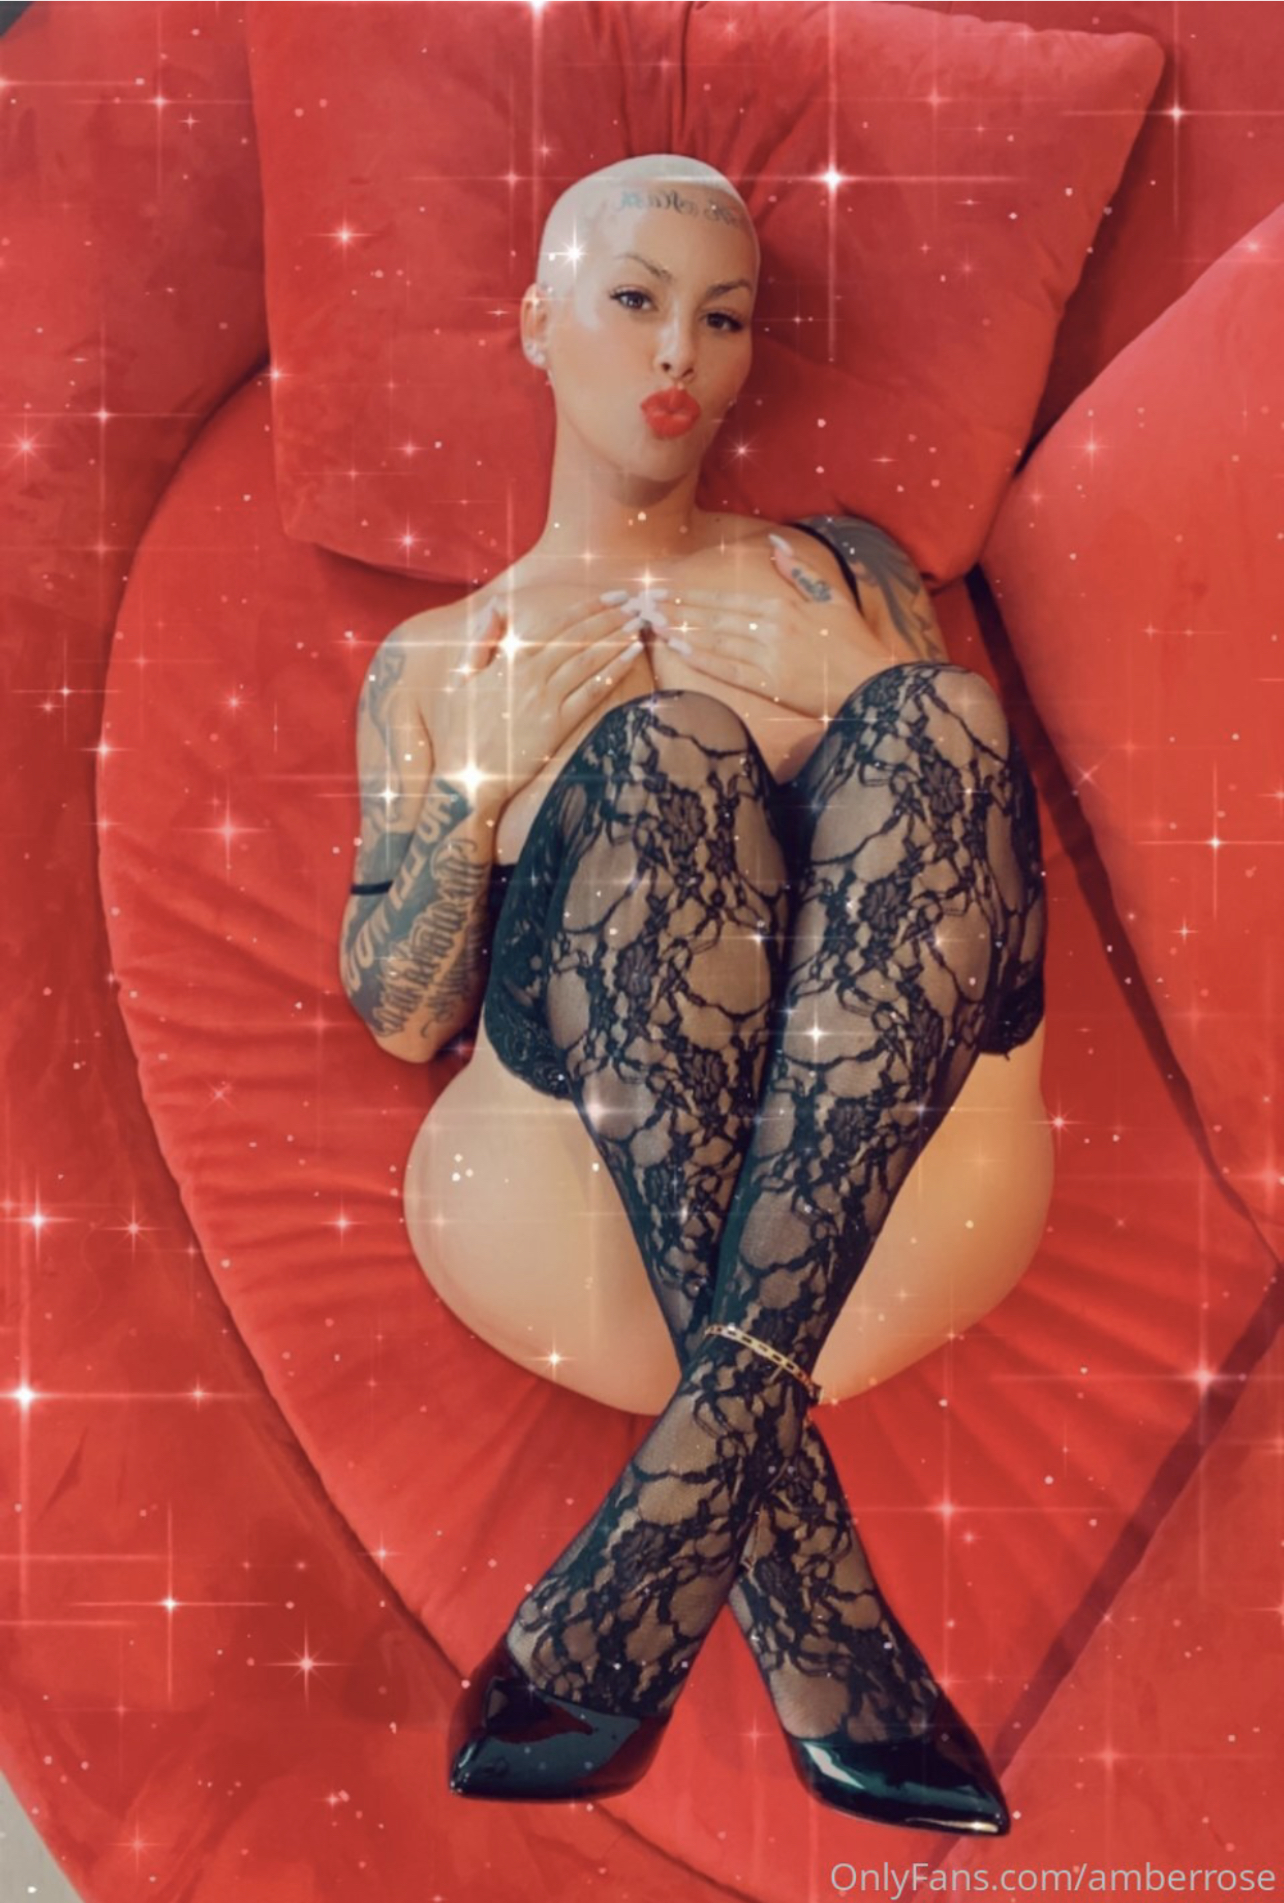 Amber rose onlyfans photos